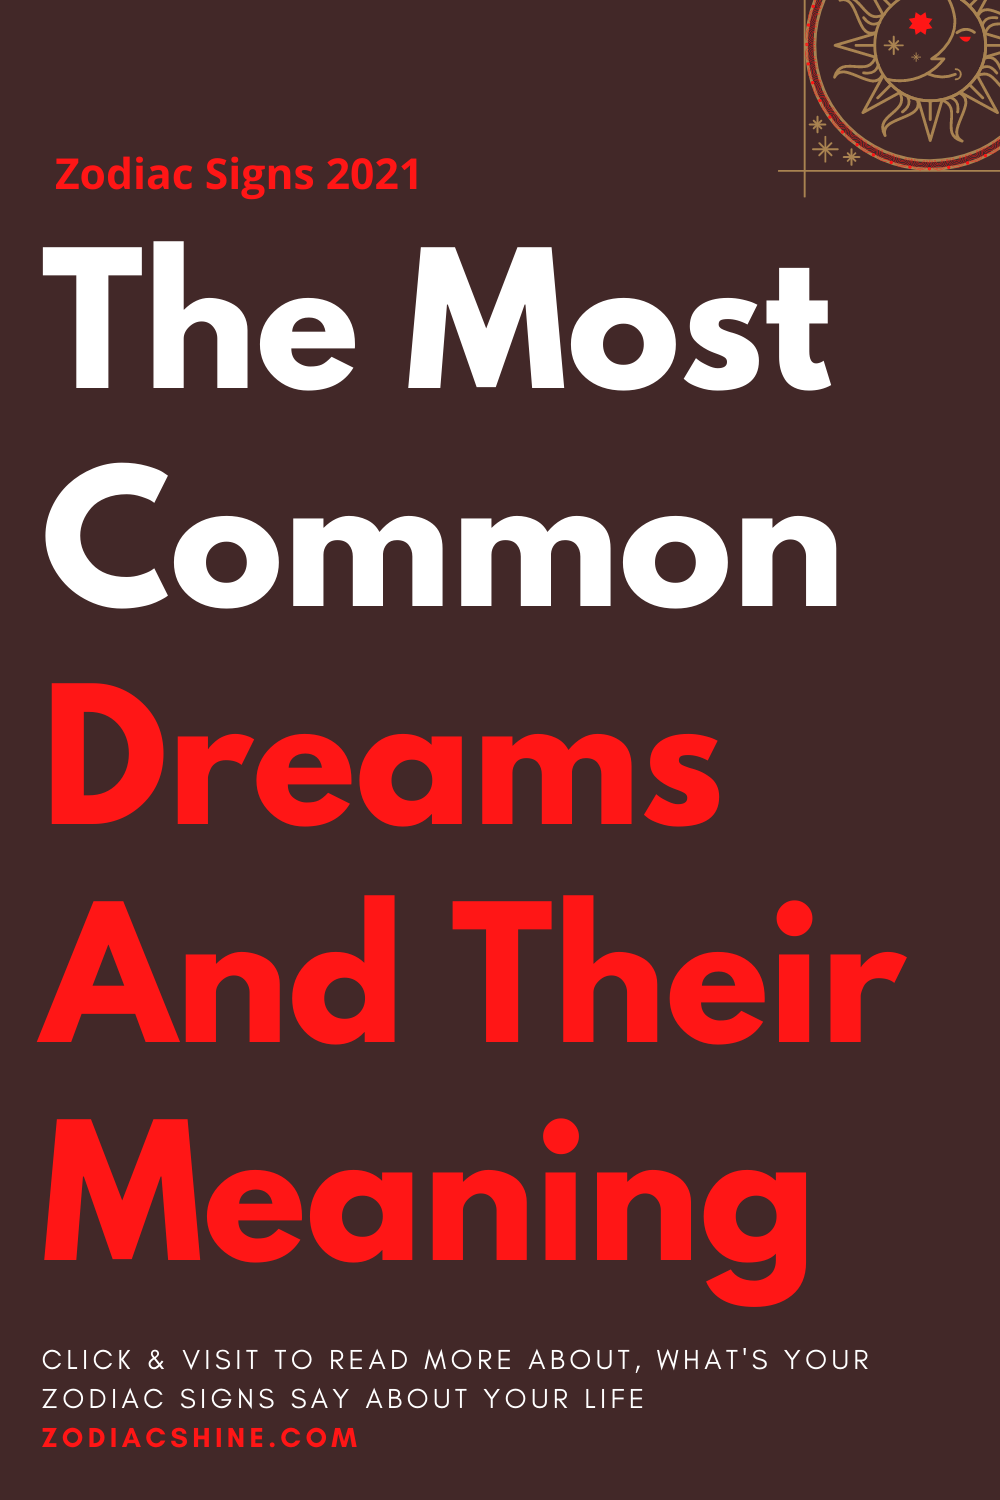 The Most Common Dreams And Their Meaning